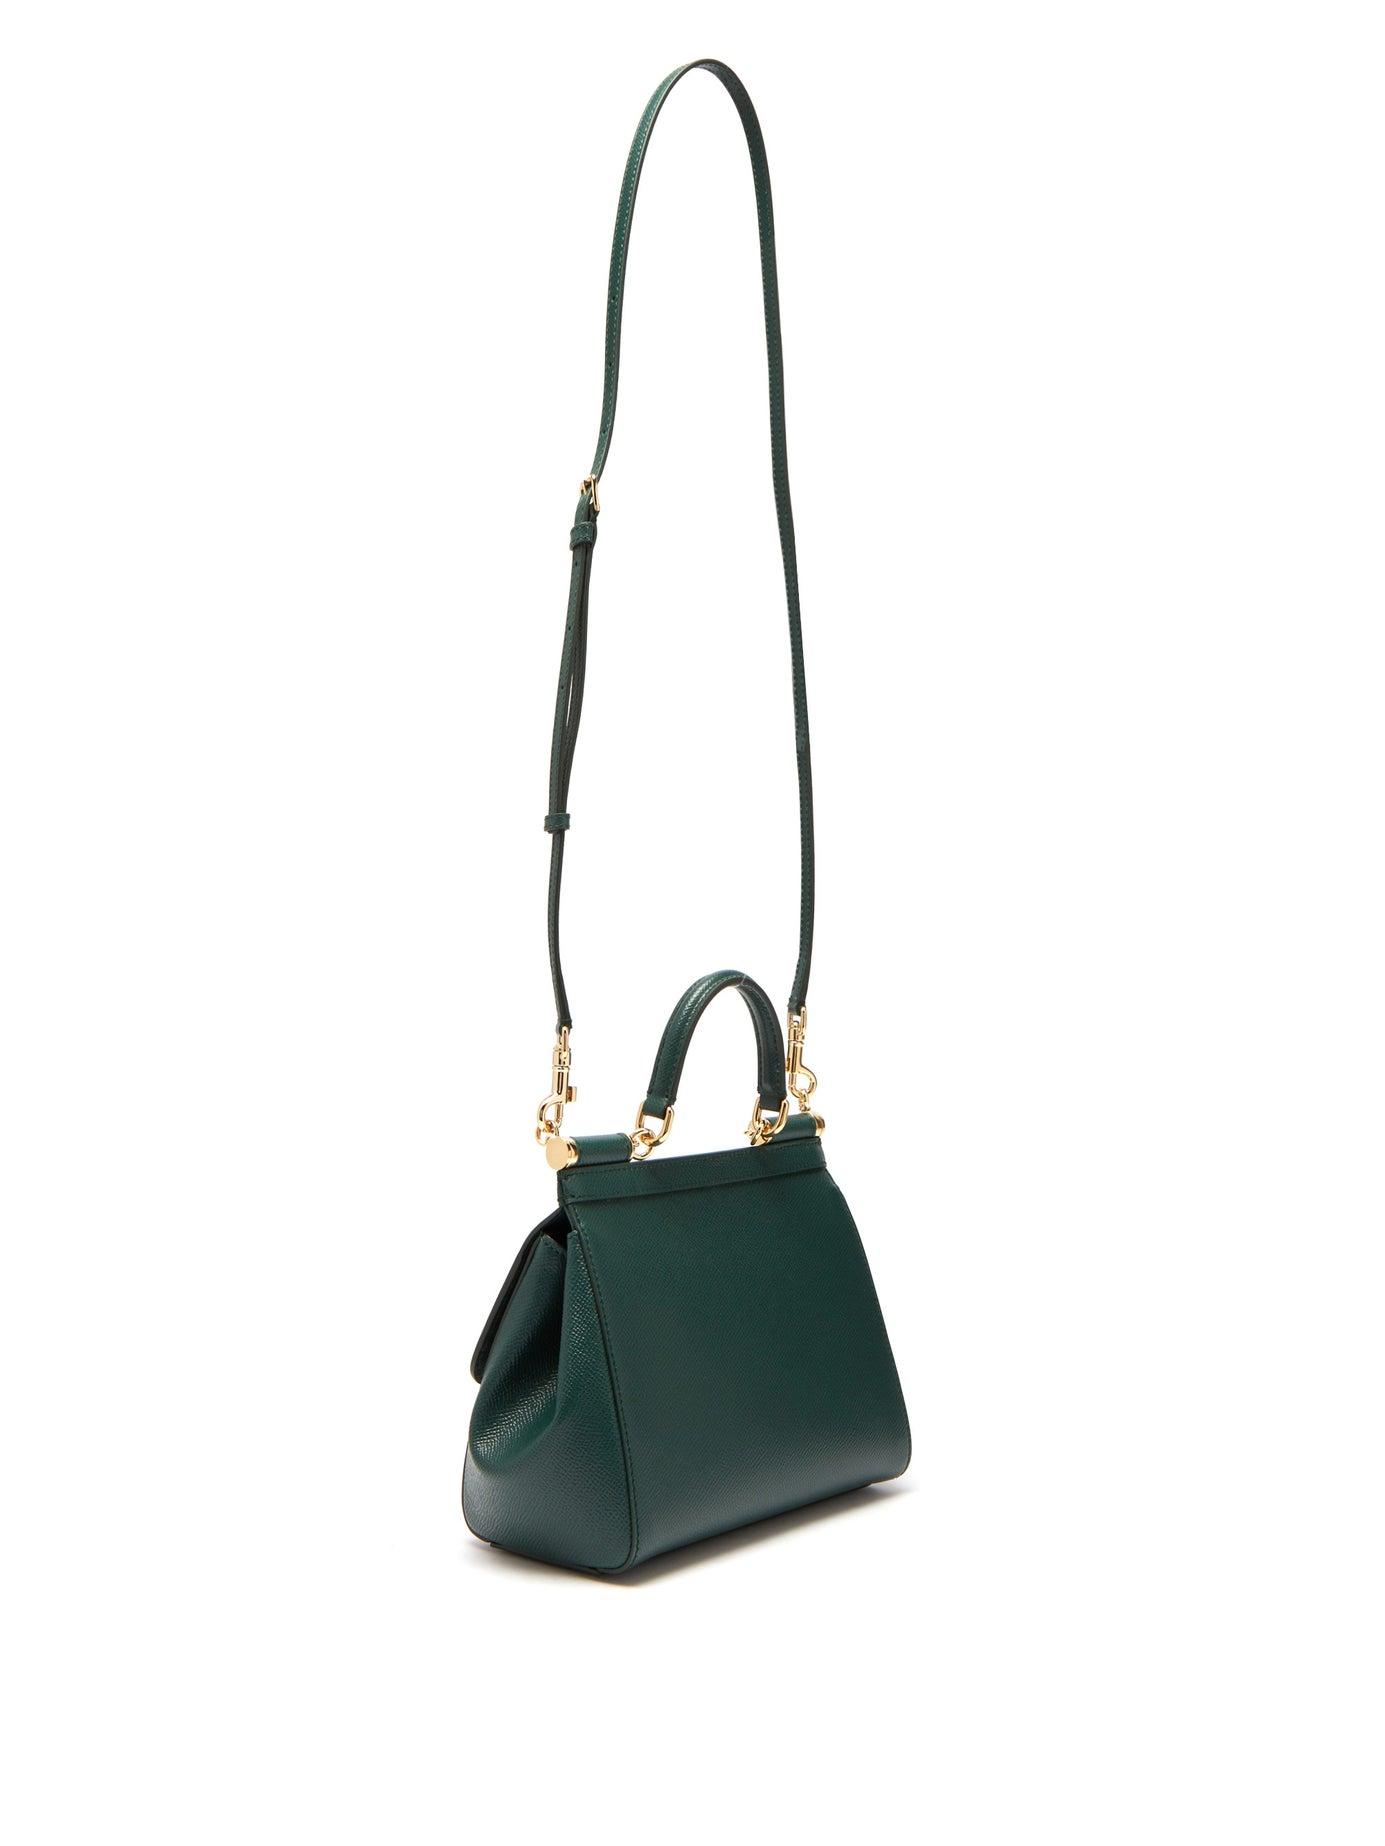 Dolce & Gabbana Small Dauphine Leather Sicily Bag in Green